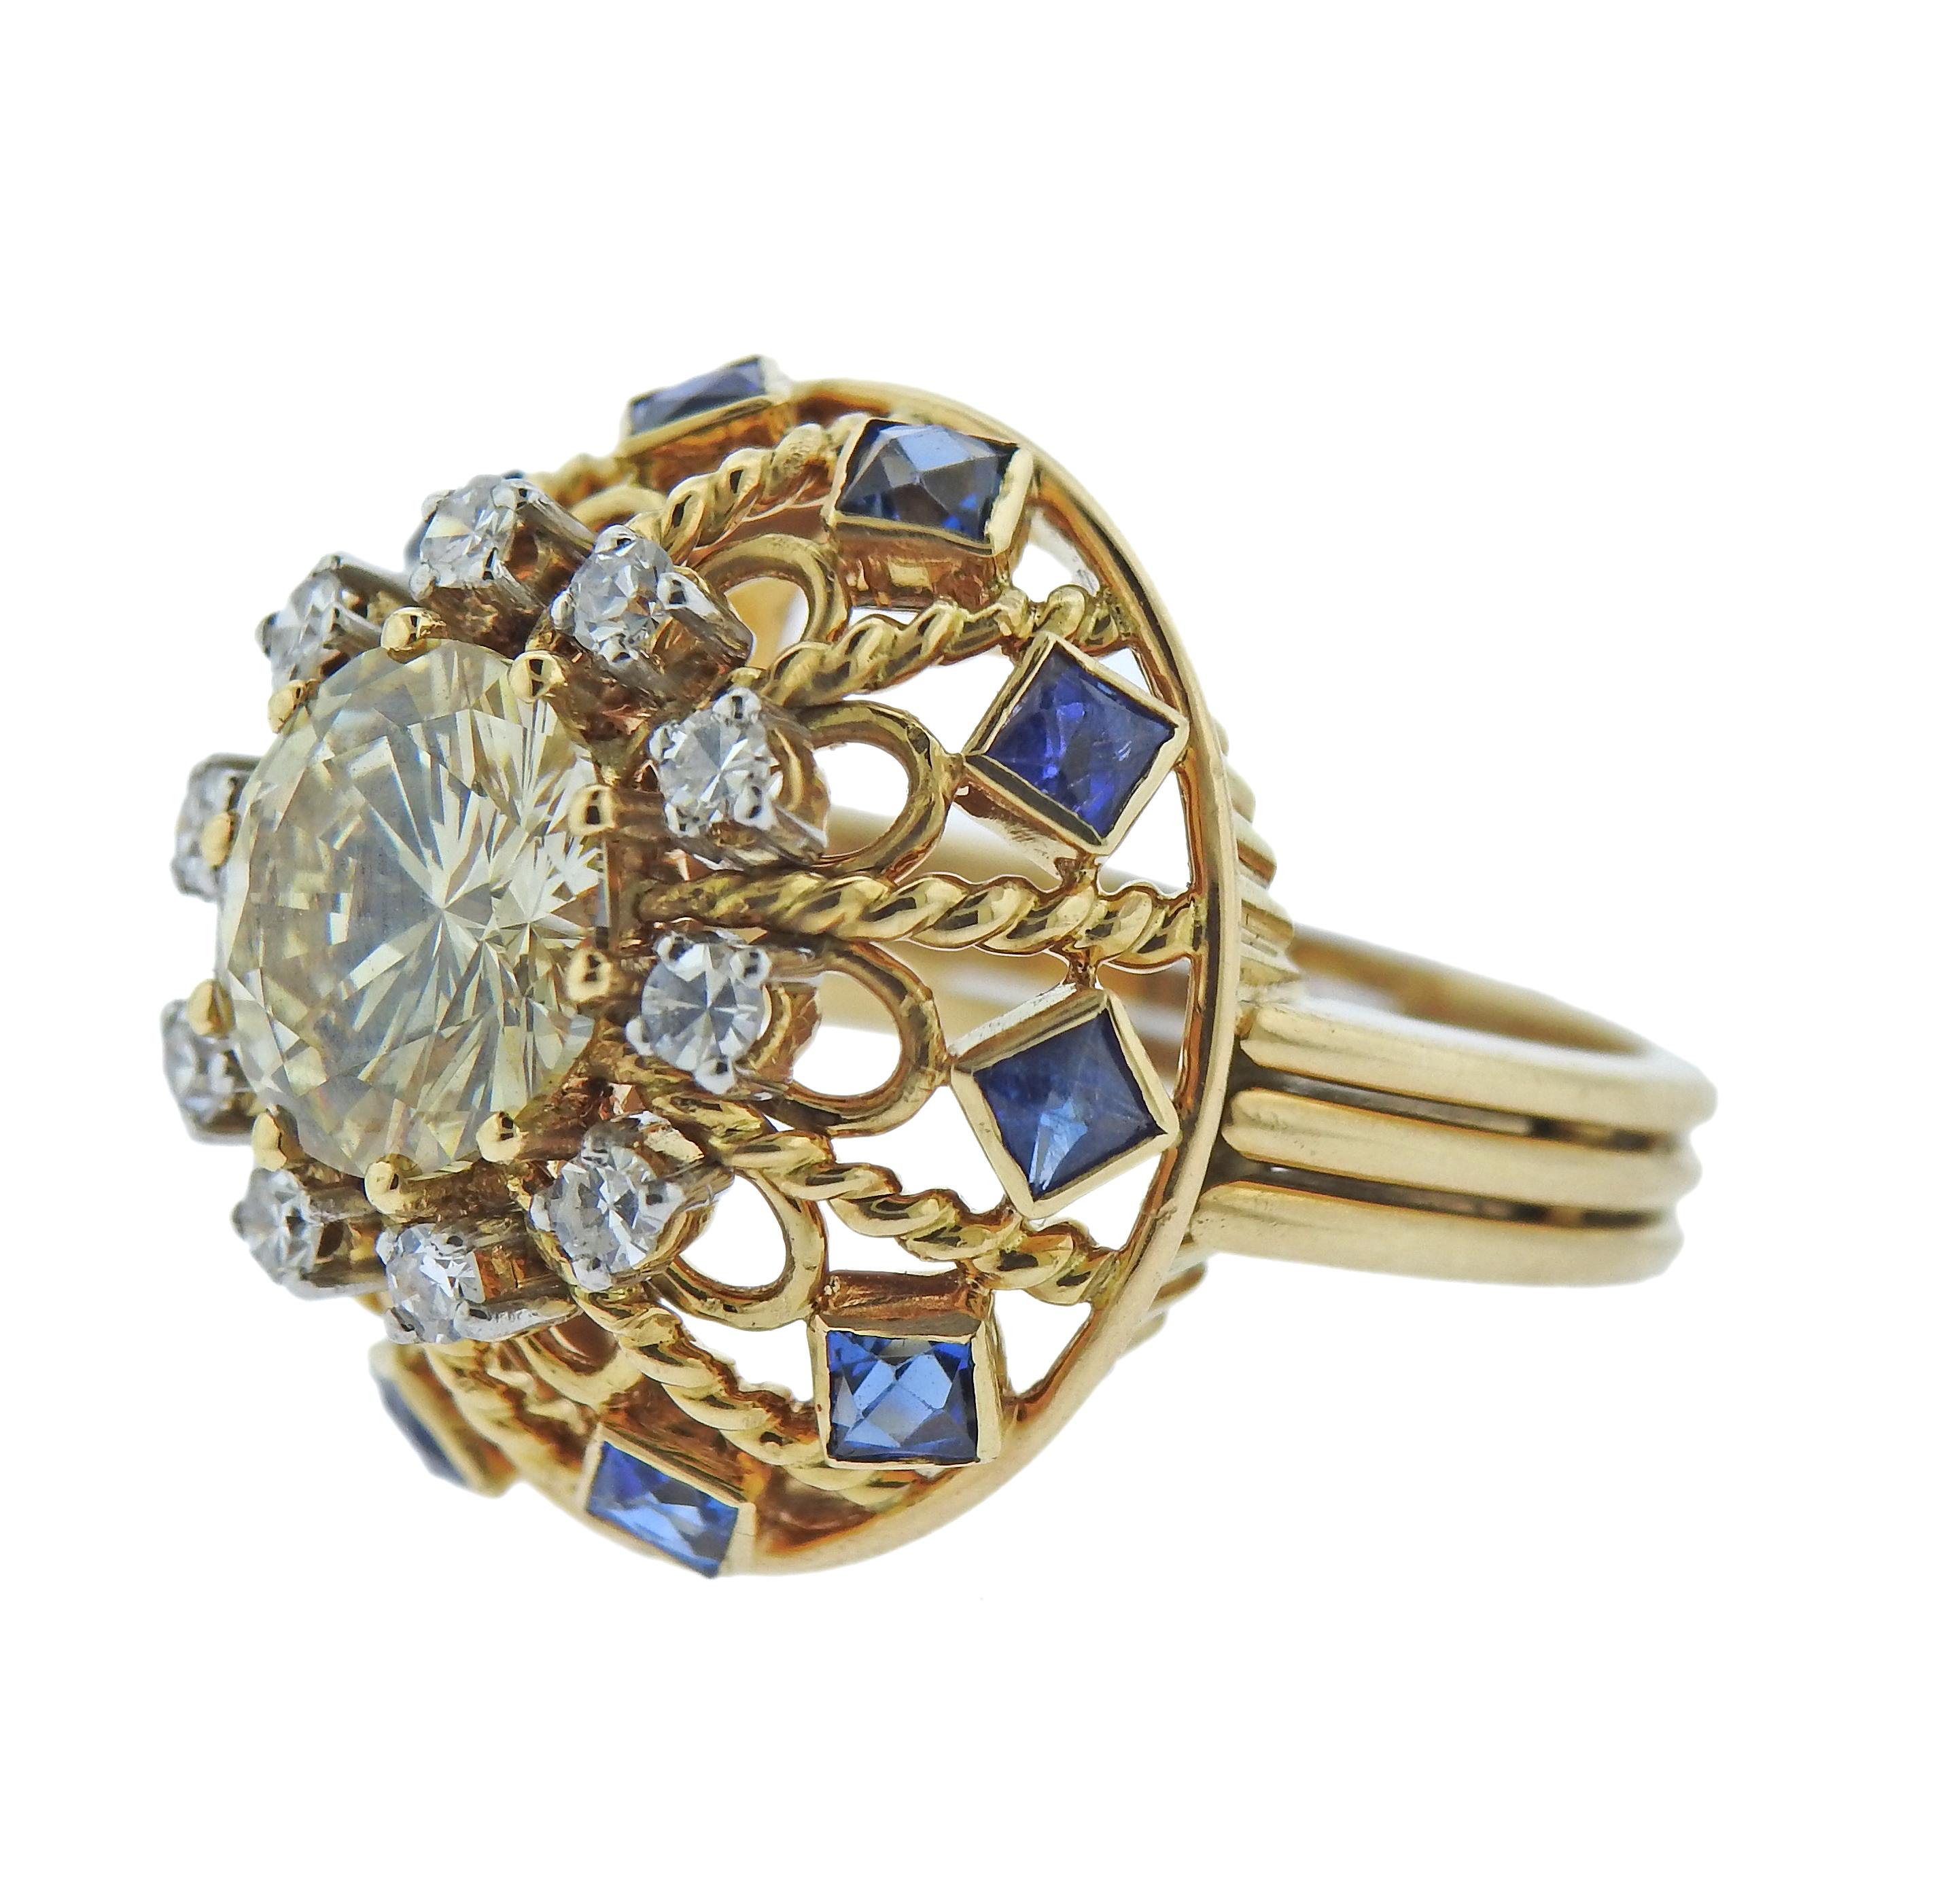 18k gold ring, set with center approx. 3.02ct round brilliant diamond, surrounded with blue sapphires and approx. 0.30ctw in diamonds. Ring size - 6, ring top - 22mm in diameter. Weight - 12.9 grams. 